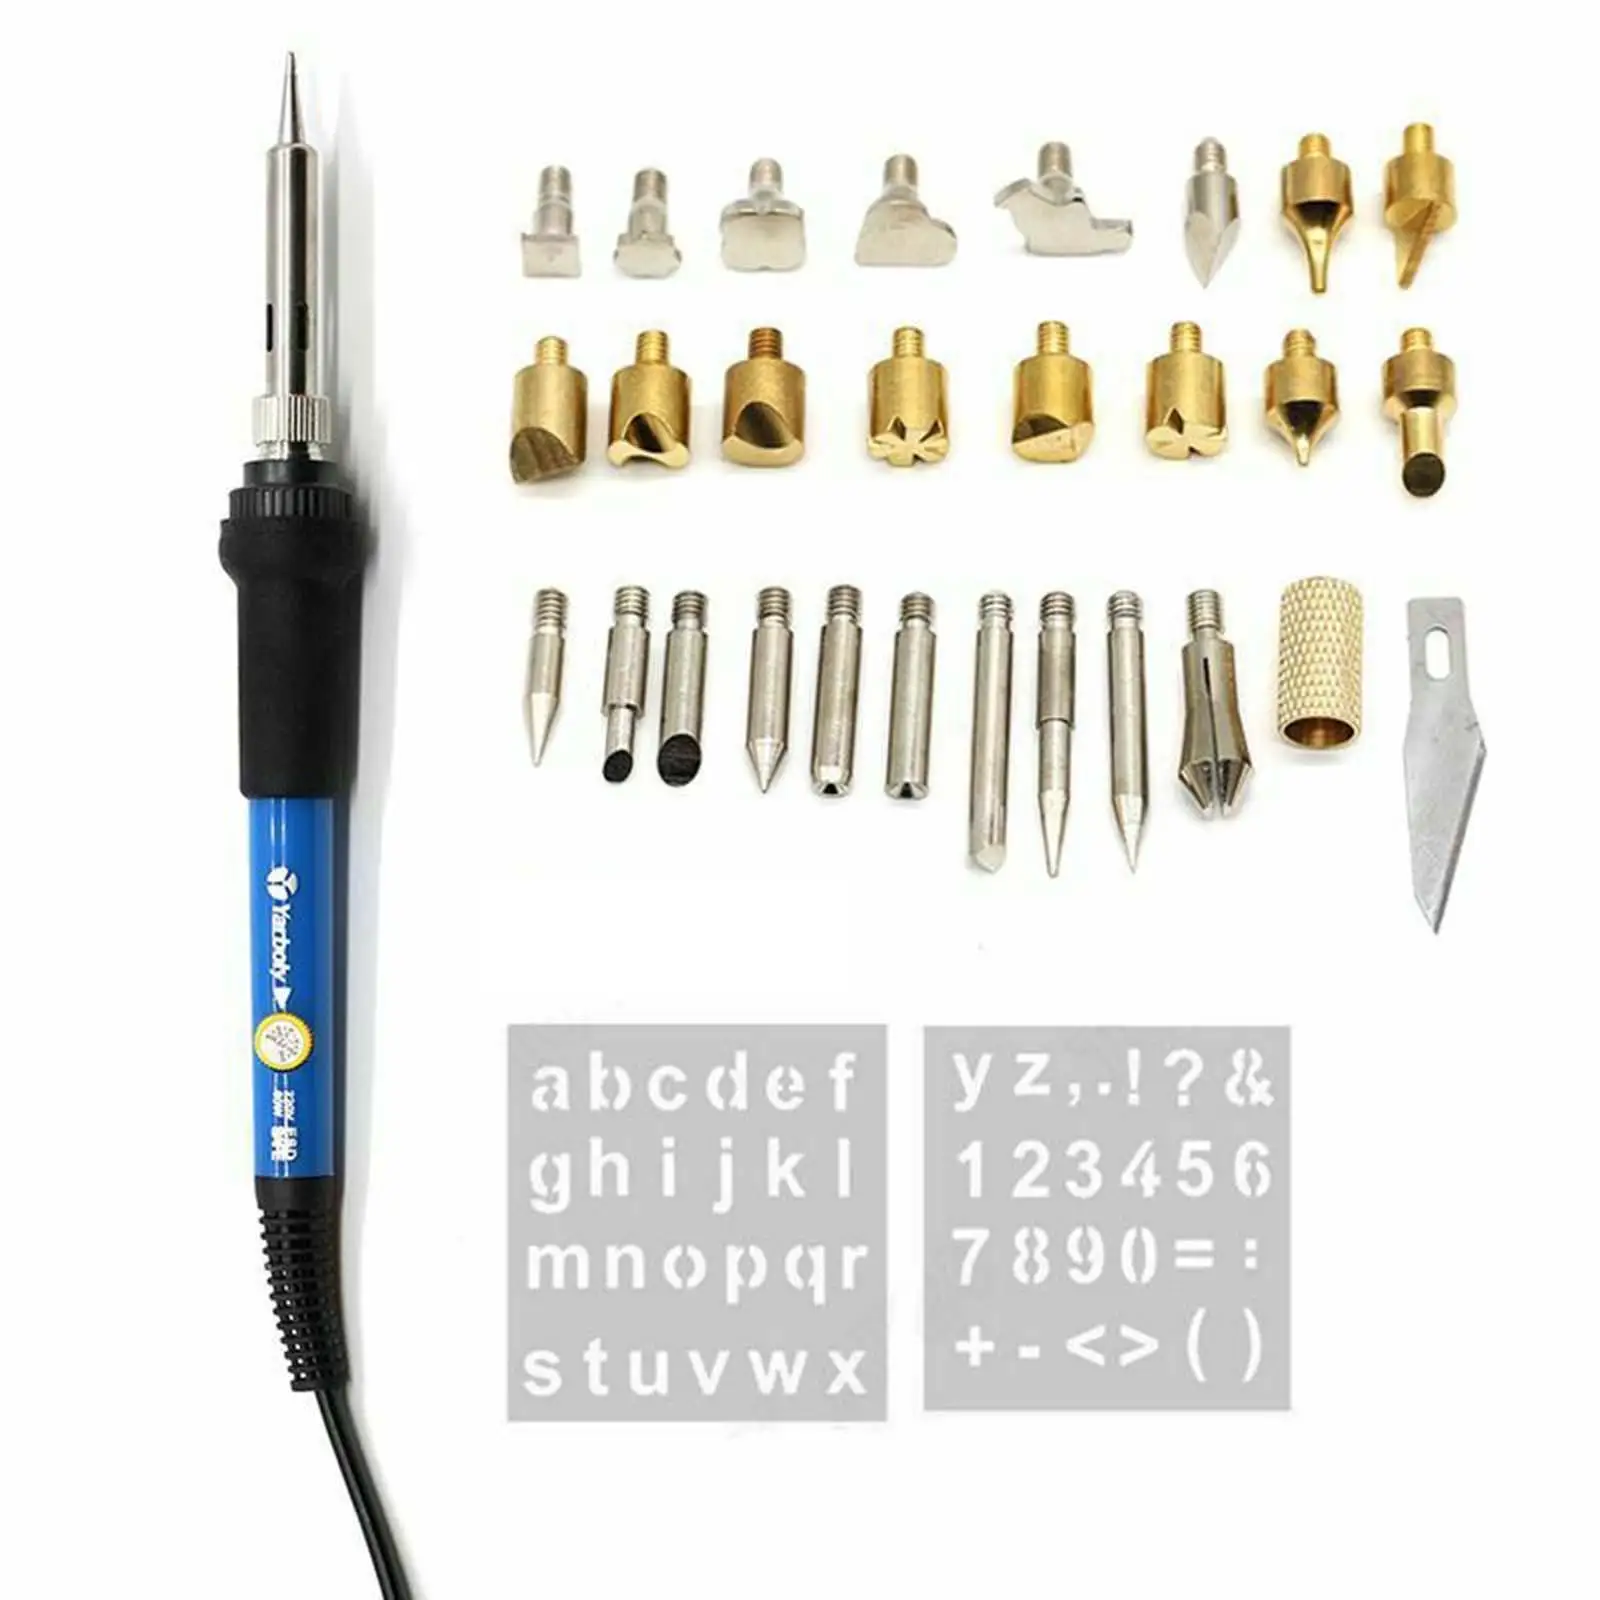 30x Solder Iron Tool Professional Electric Digital Display Welding Tool Portable DIY with Soldering Tips 60W Soldering Iron Set